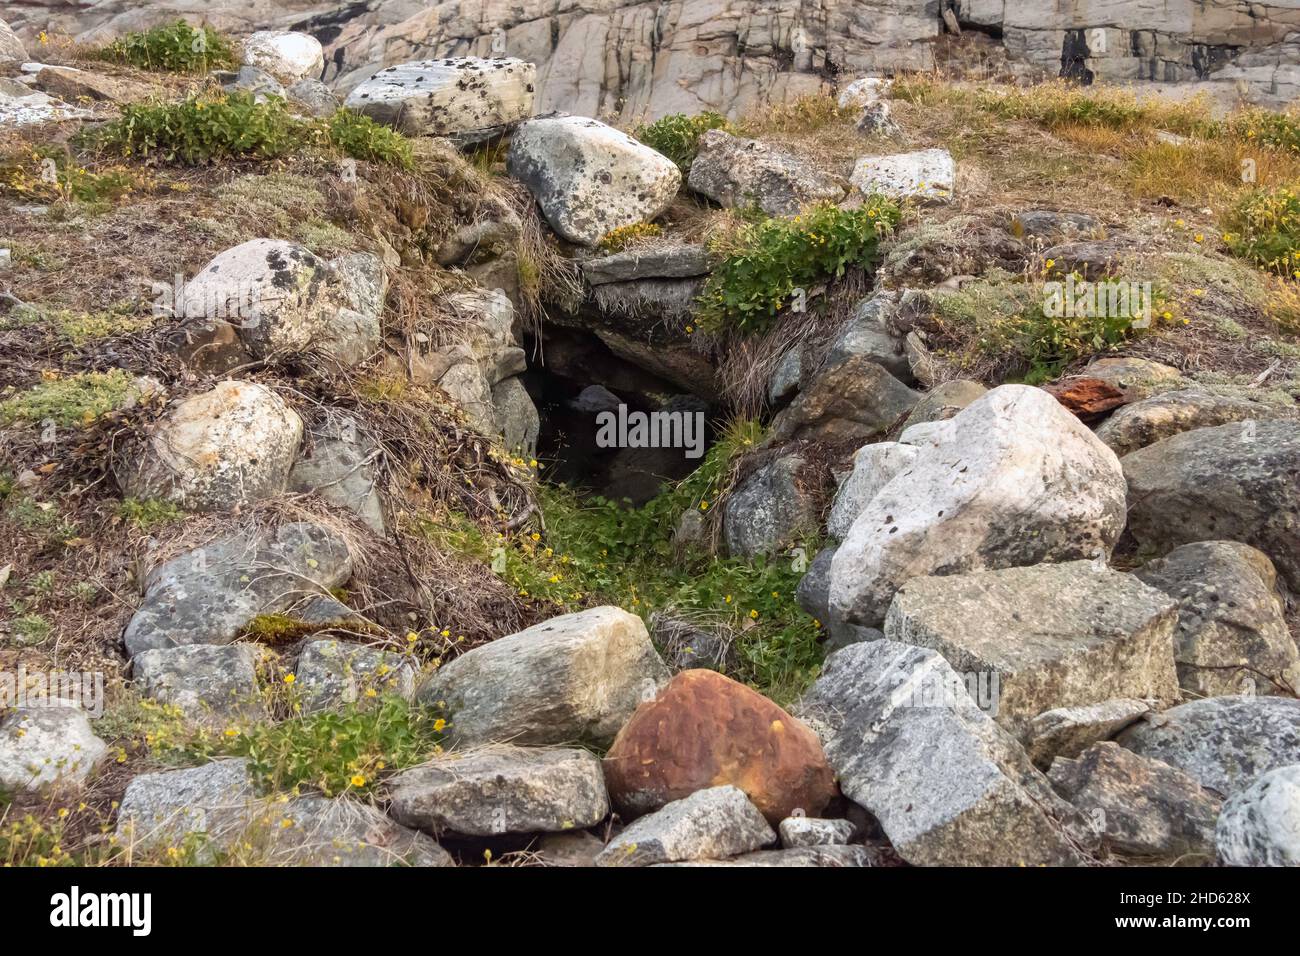 Remains of a Thule winter house with below ground entrance, Danmark O, Scoresby Sund, East Greenland Stock Photo